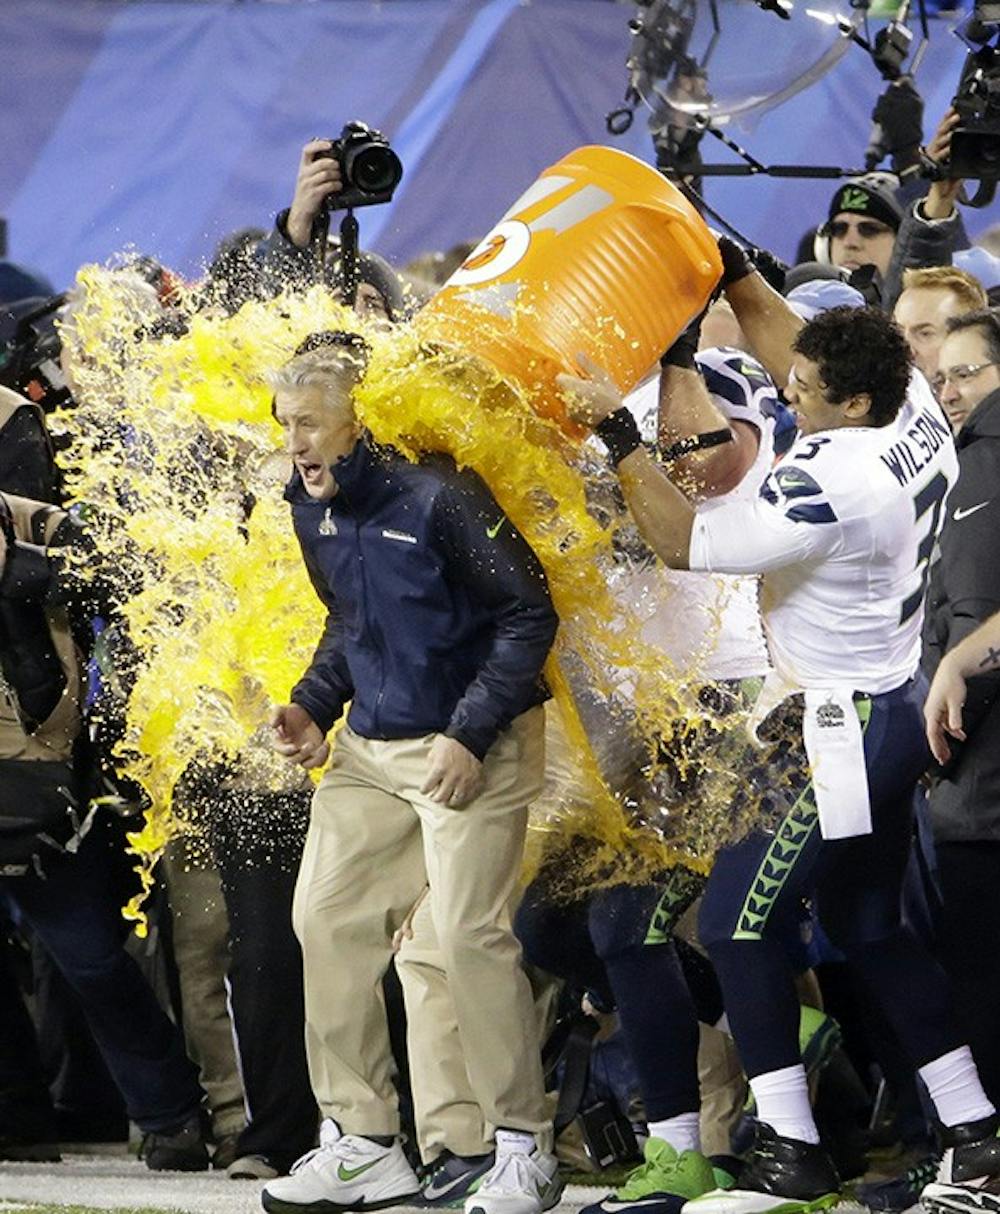 Seattle Seahawks players dump Gatorade on head coach Pete Carroll at the conclusion of a 43-8 win against the Denver Broncos in Super Bowl XLVIII at MetLife Stadium in East Rutherford, N.J., on Sunday, Feb. 2, 2014. (J. Patric Schneider/MCT)